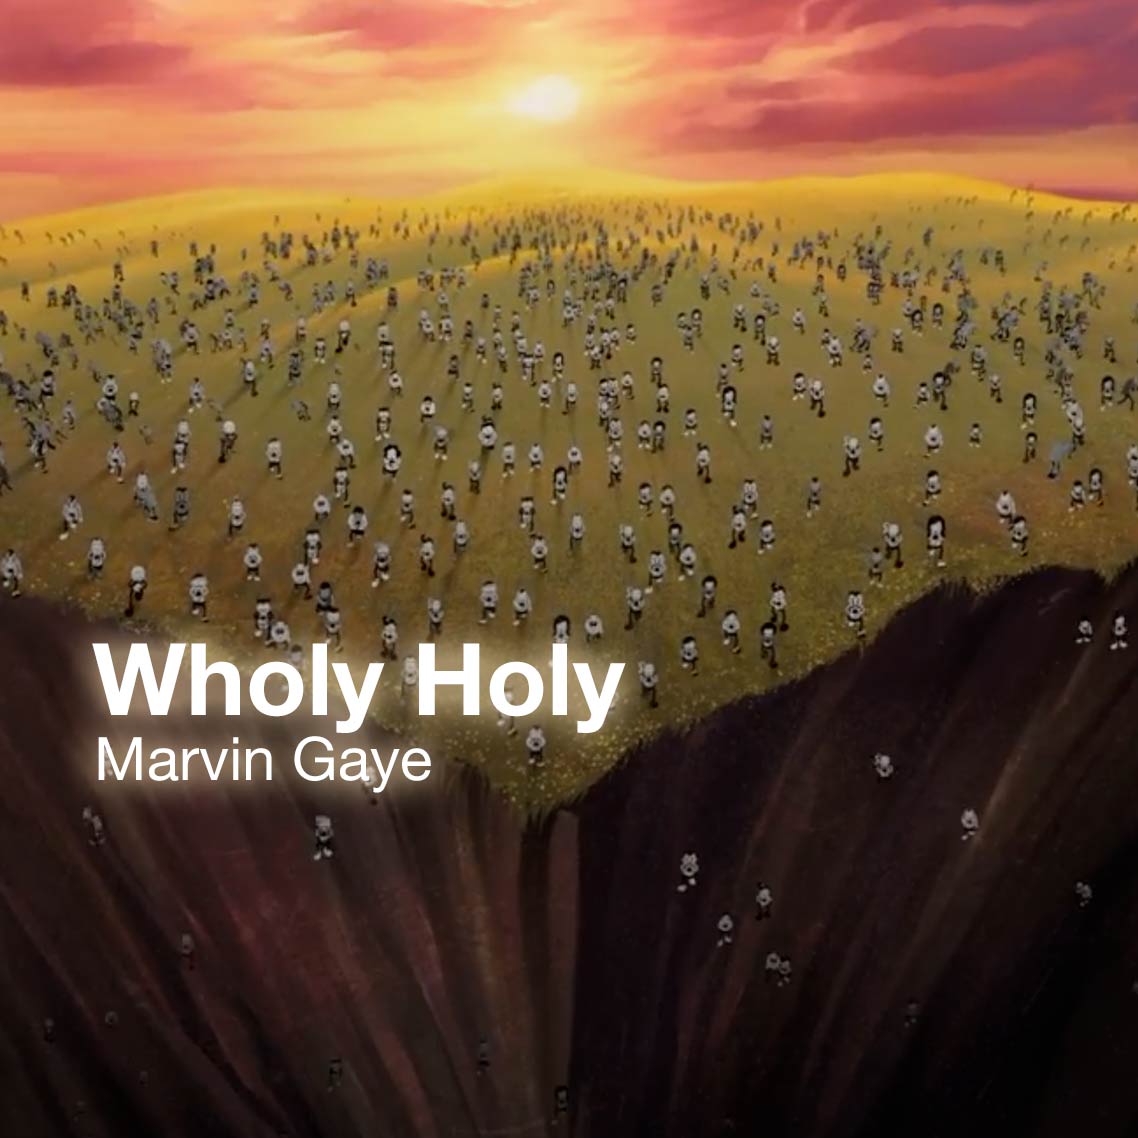 Wholy Holy | music video 